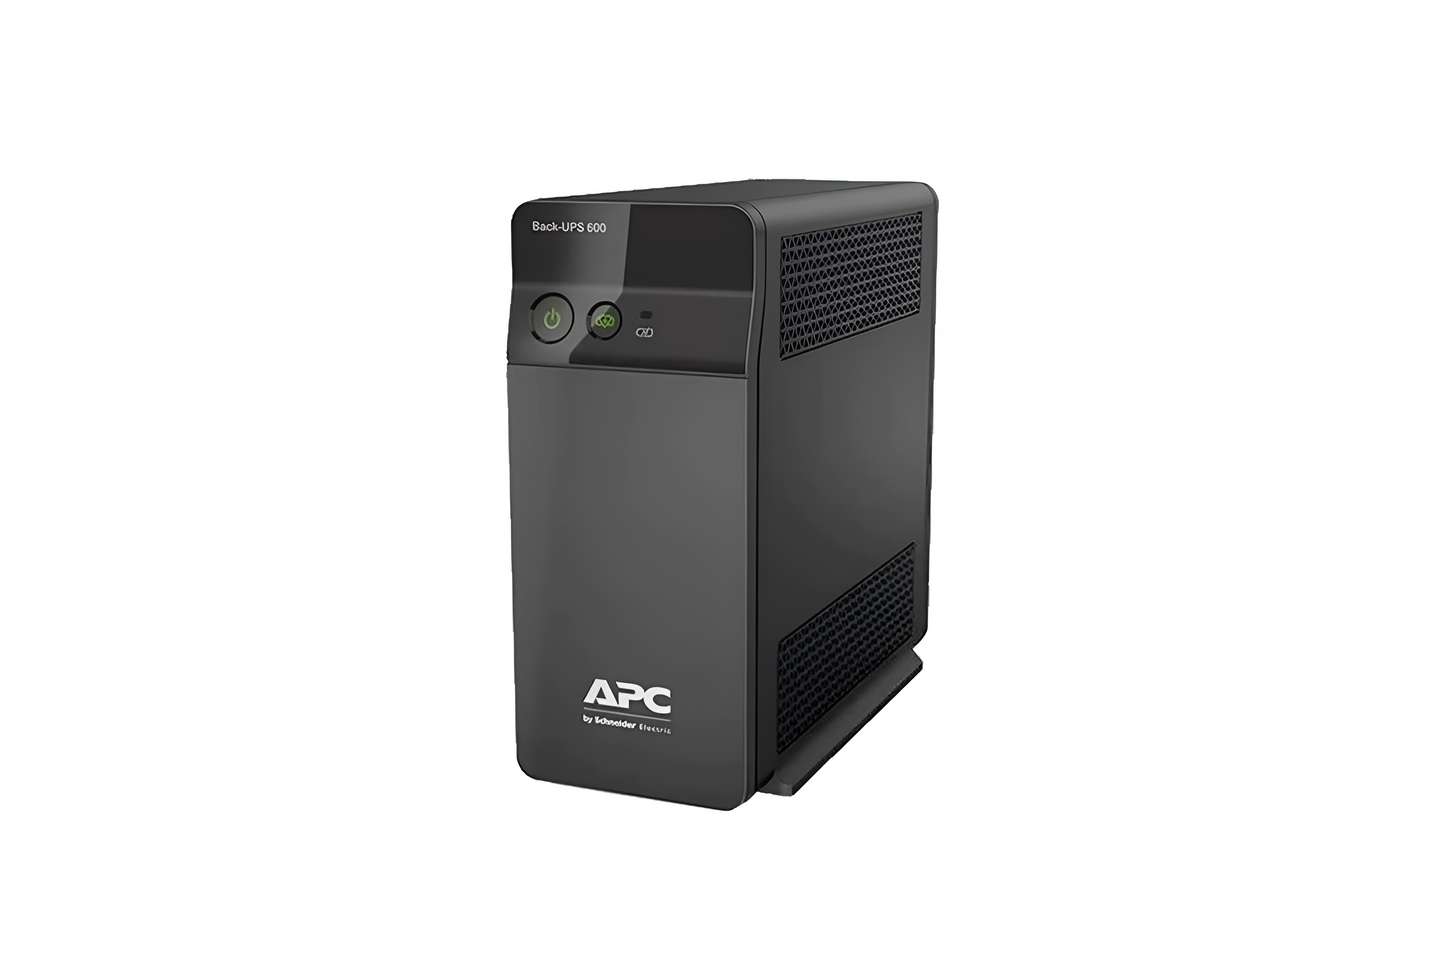 APC BX600C-IN 600VA UPS: Protect Your Devices from Power Outages and Surges